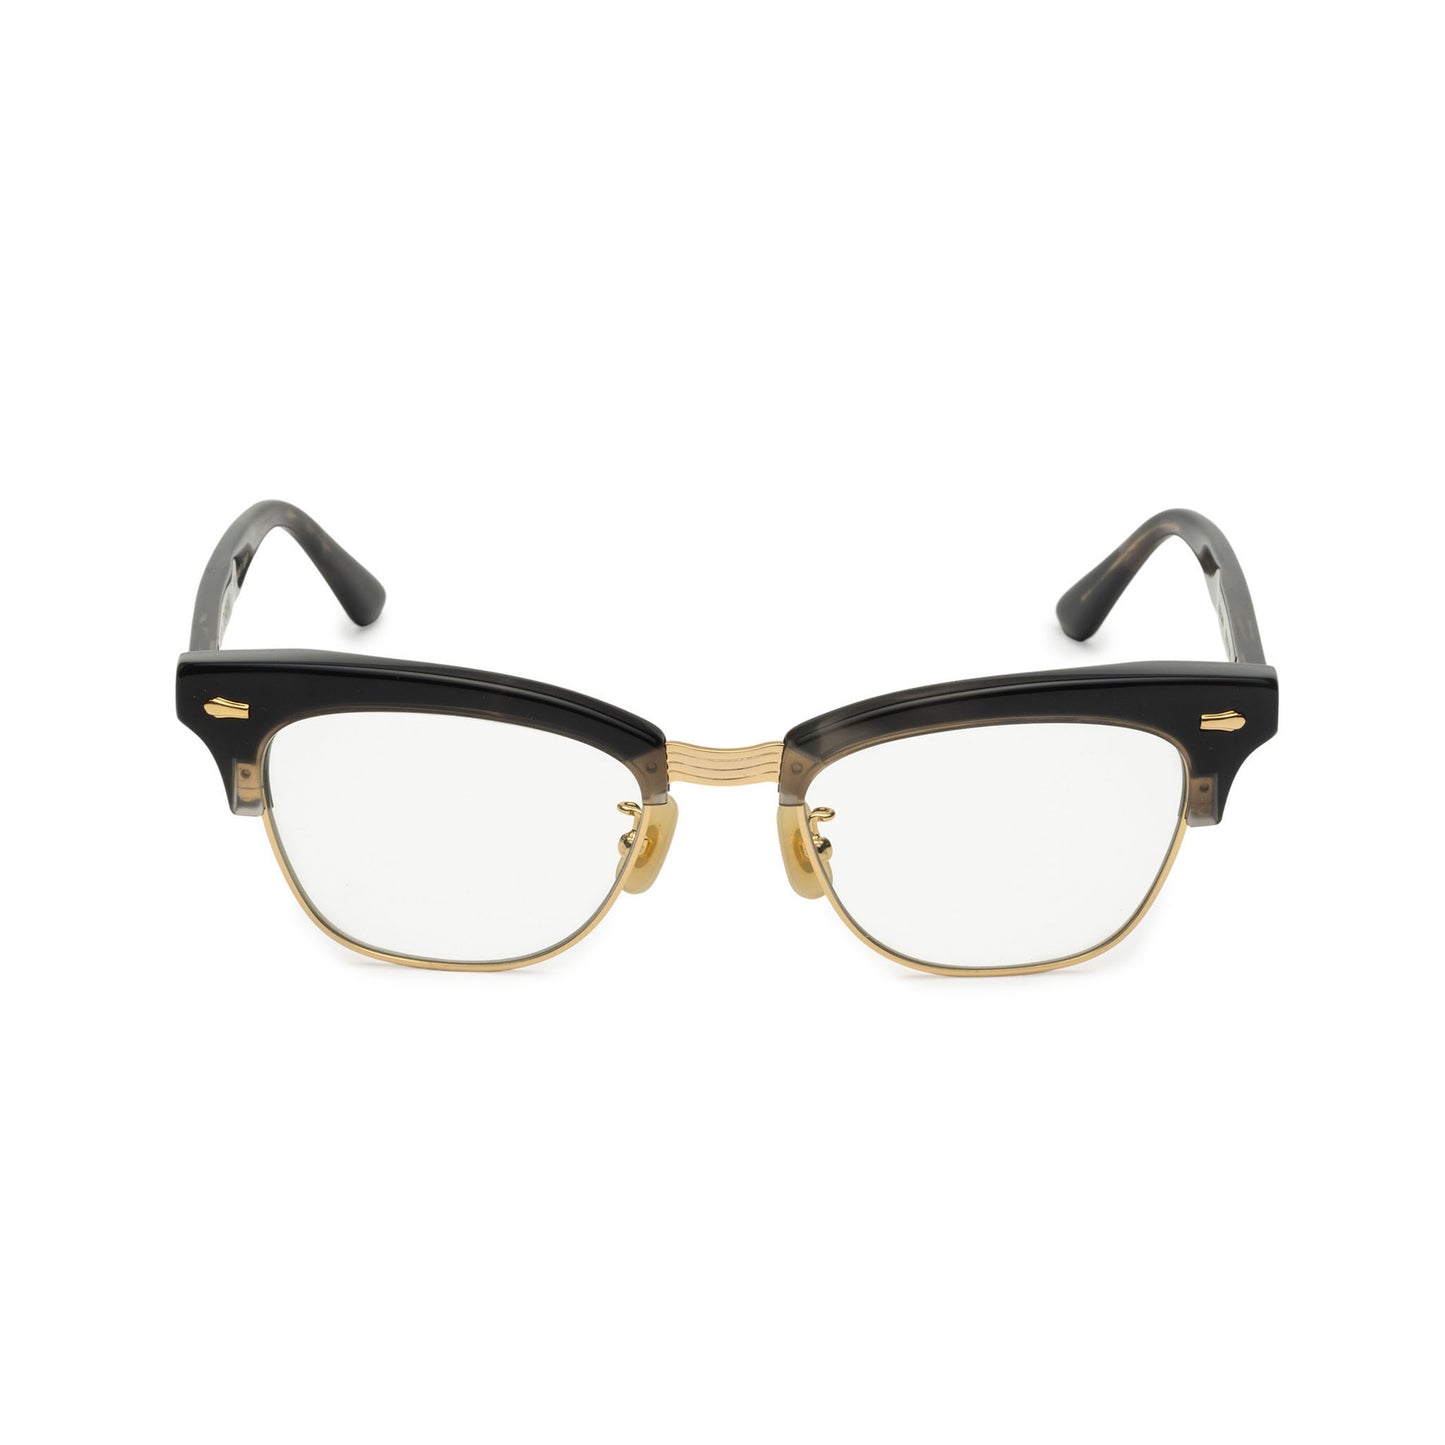 EXCELSIOR gray marble / color photochromic brown lens